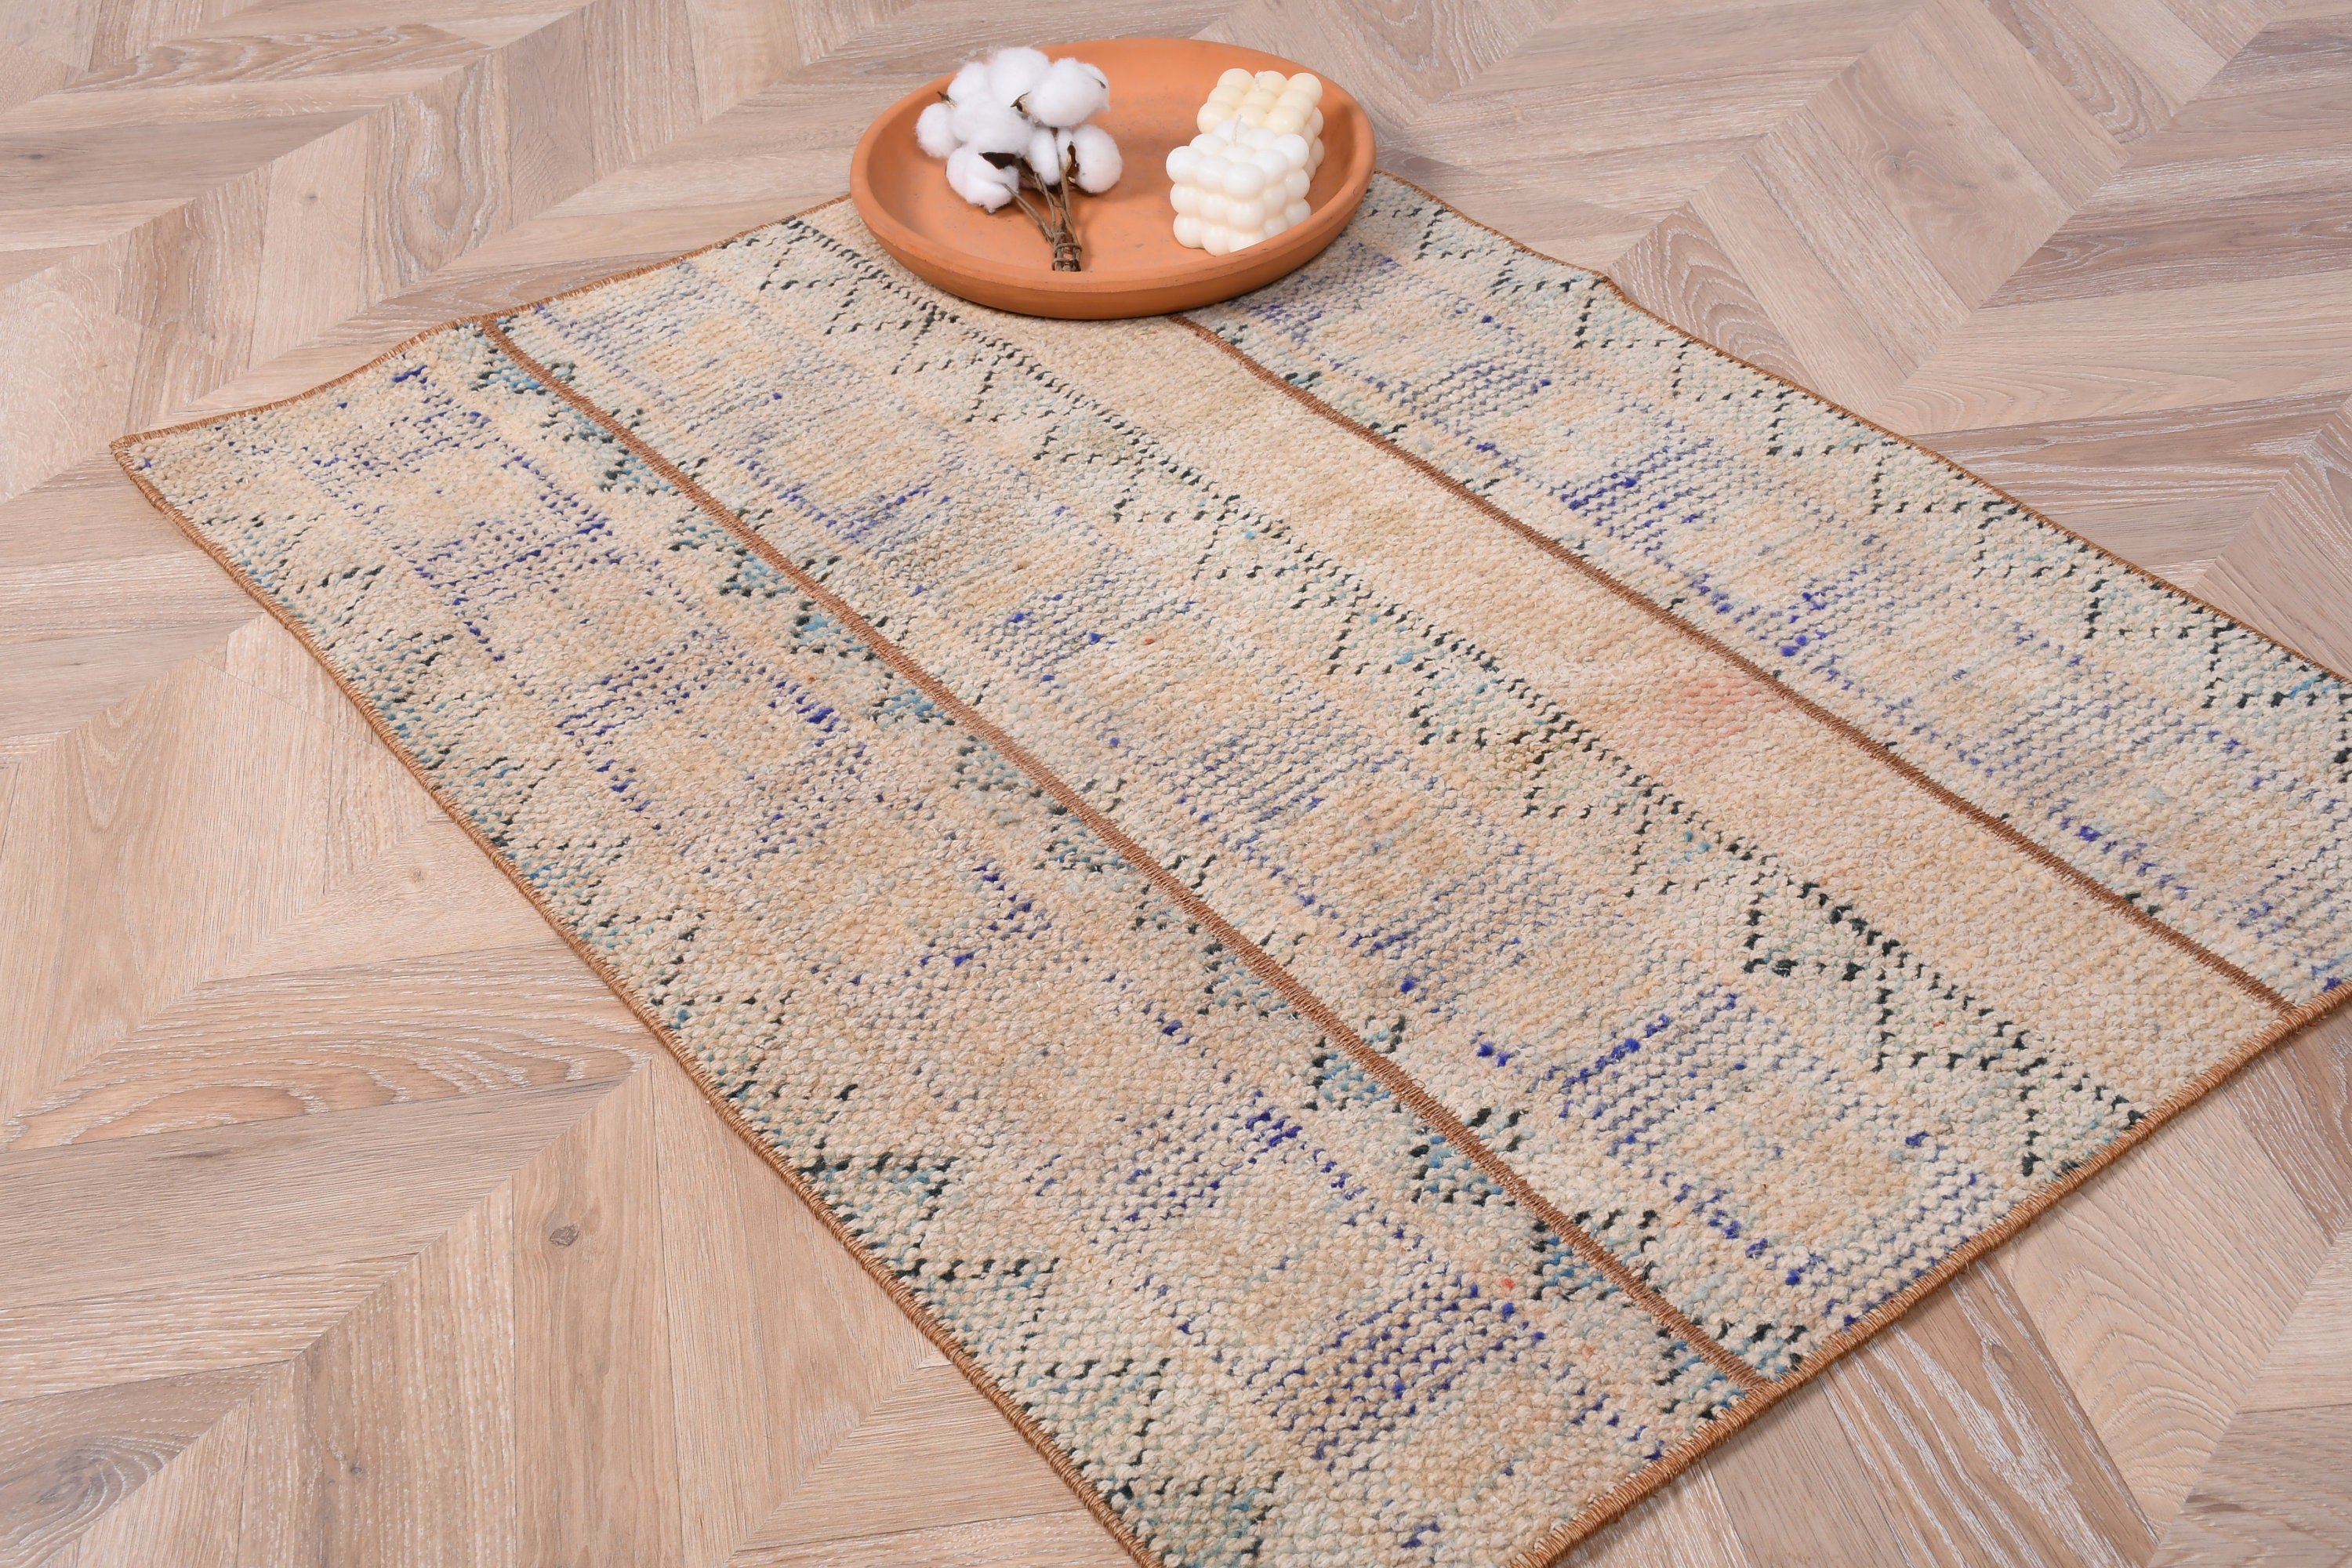 Entry Rug, Rugs for Entry, Beige Kitchen Rug, 2.3x3.2 ft Small Rugs, Turkish Rug, Oushak Rug, Door Mat Rugs, Kitchen Rug, Vintage Rugs